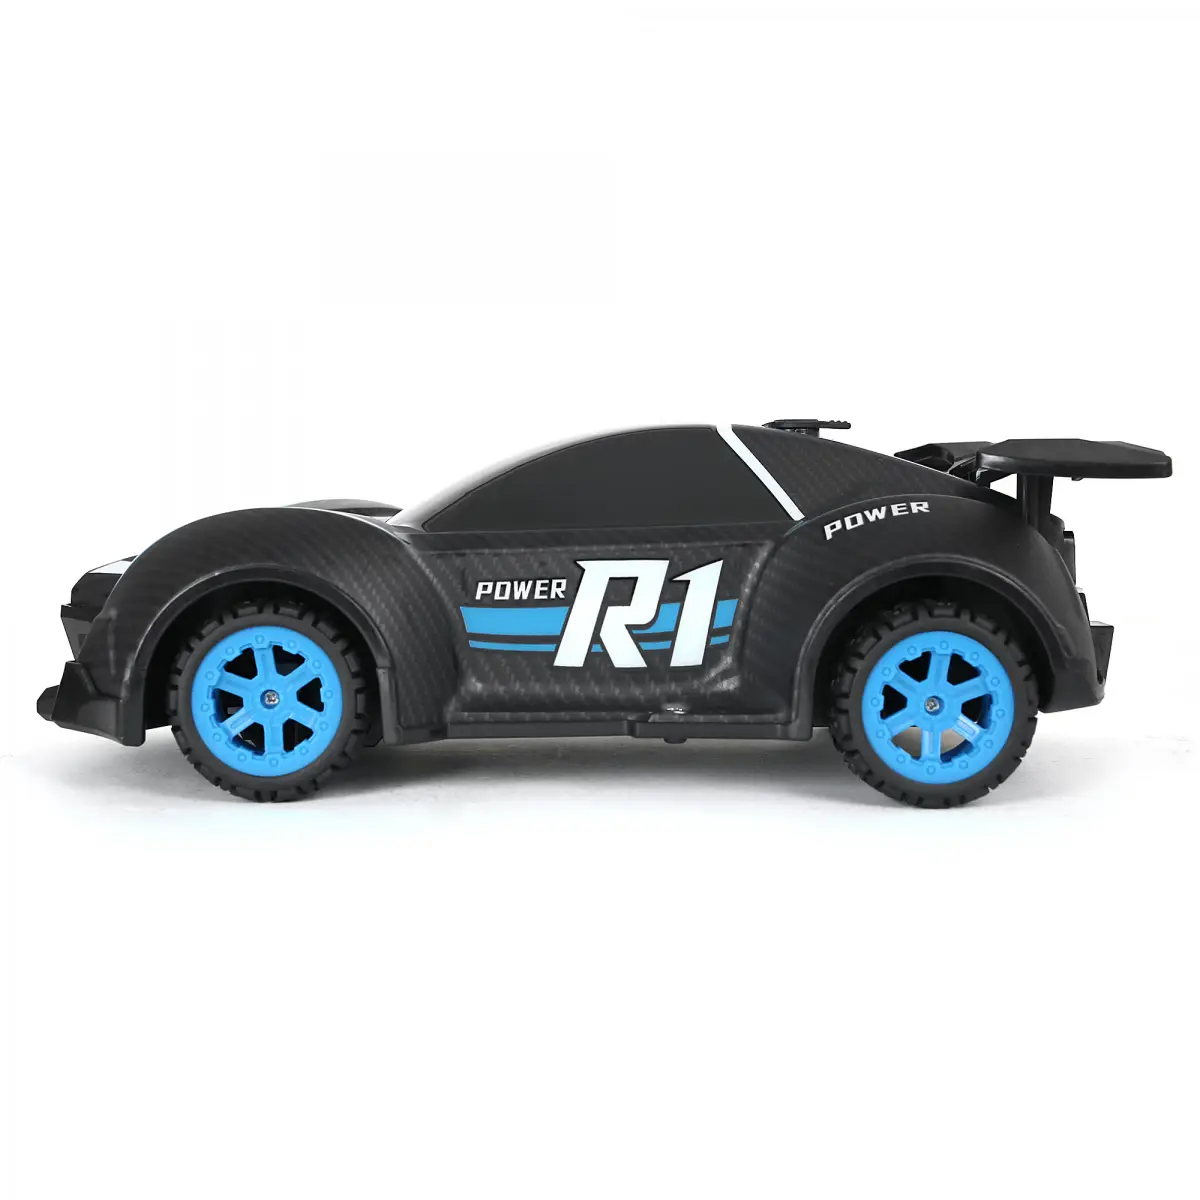 Ralleyz X-Spray Monster Stunt Racer, Remote Control Toys for Kids, 6Y+, Blue